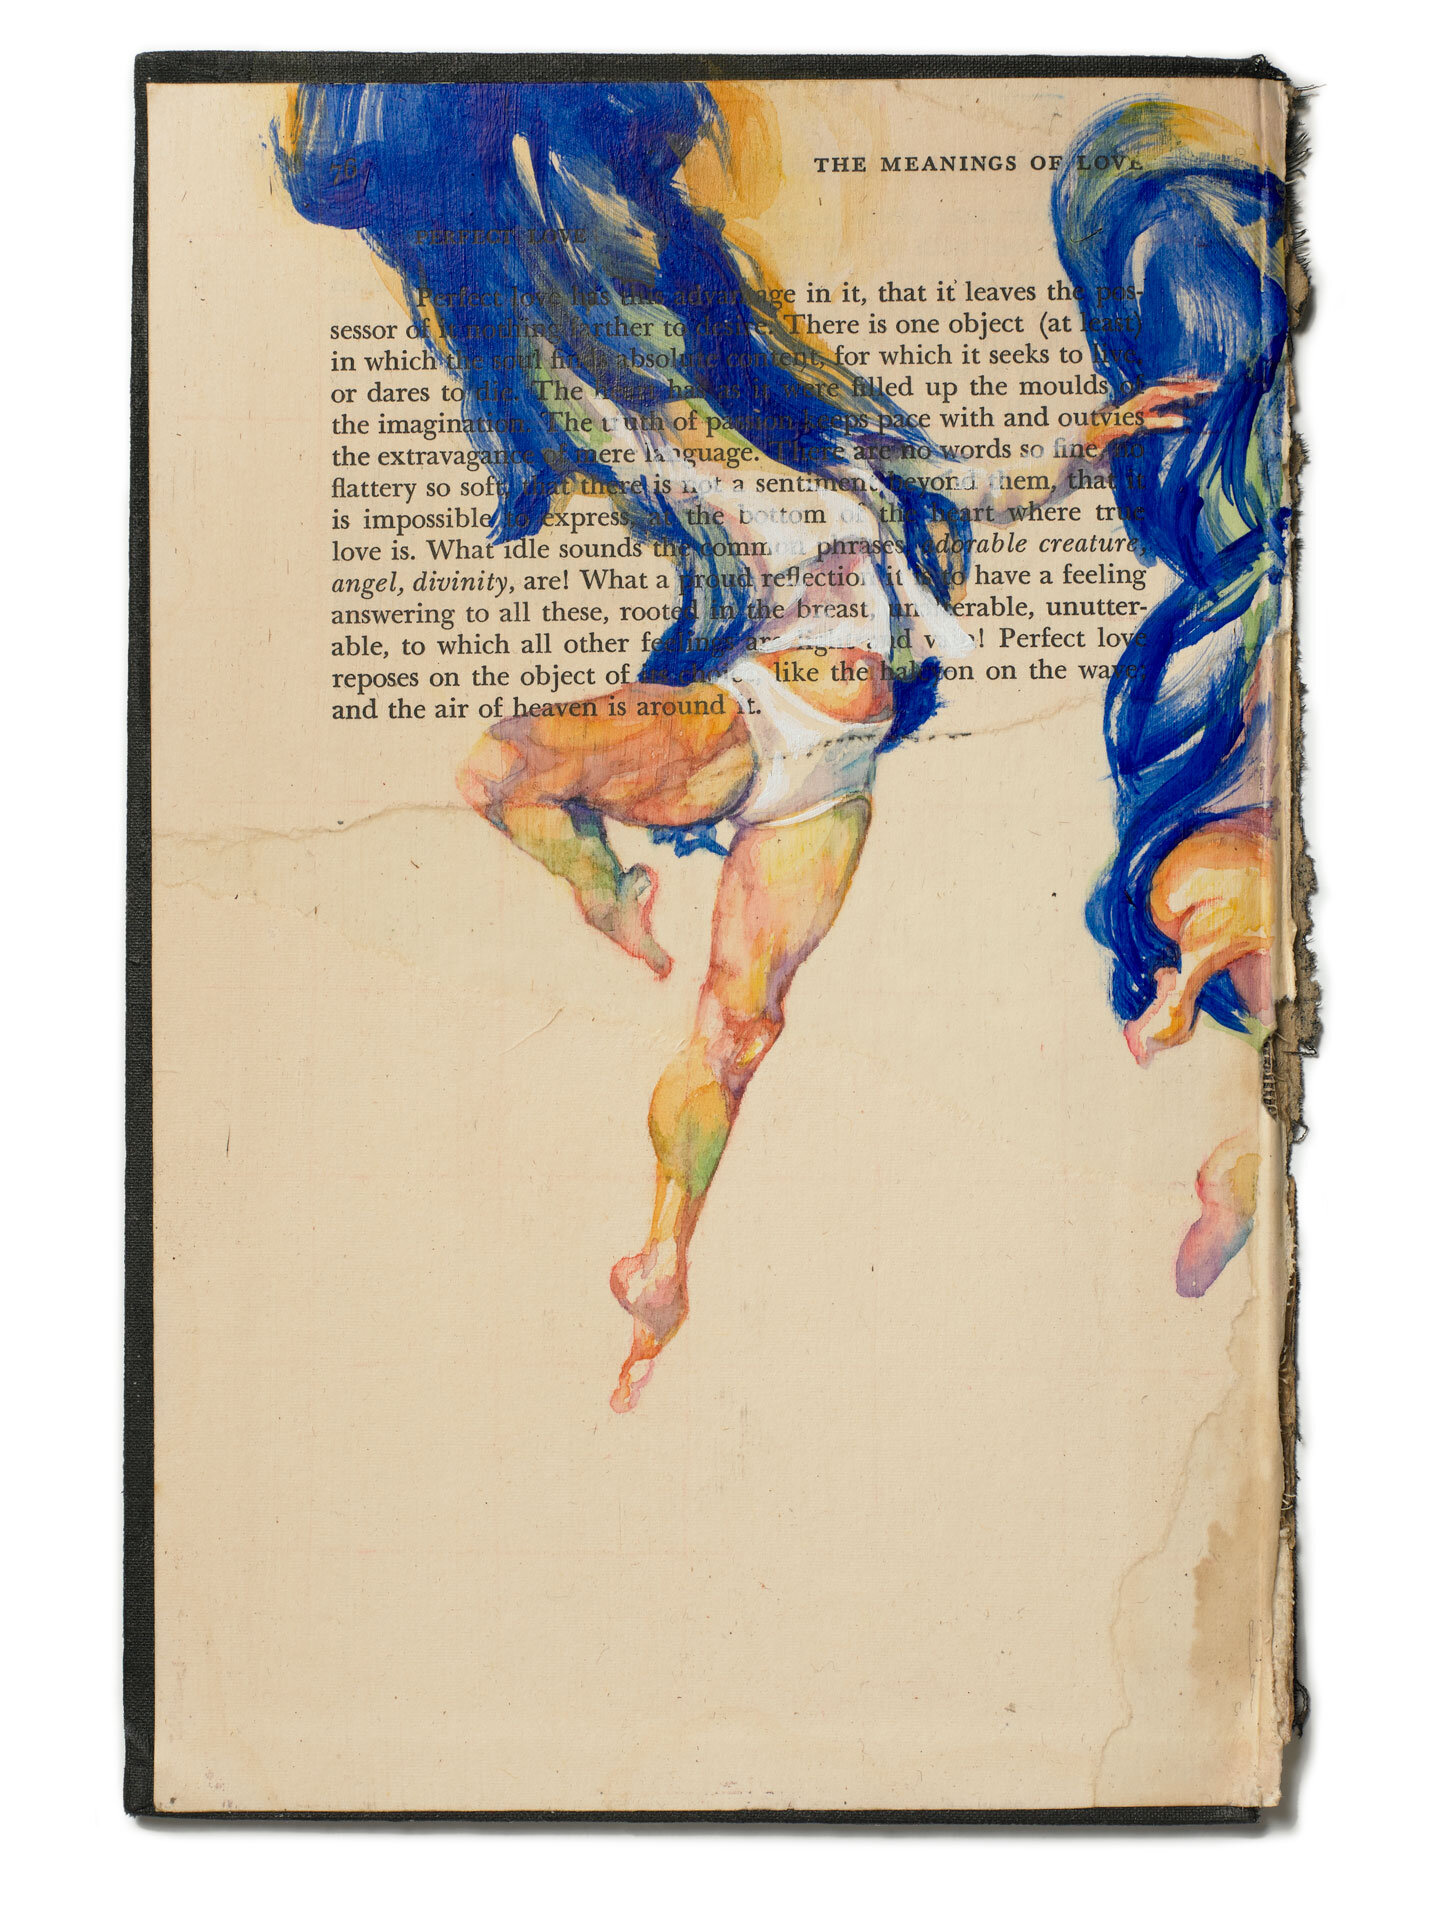    RESIST Portrait: Literary Series, The Air Of Heaven   Watercolor on Book Cover 6in x 9.5in (Framed 11in x 14in) 